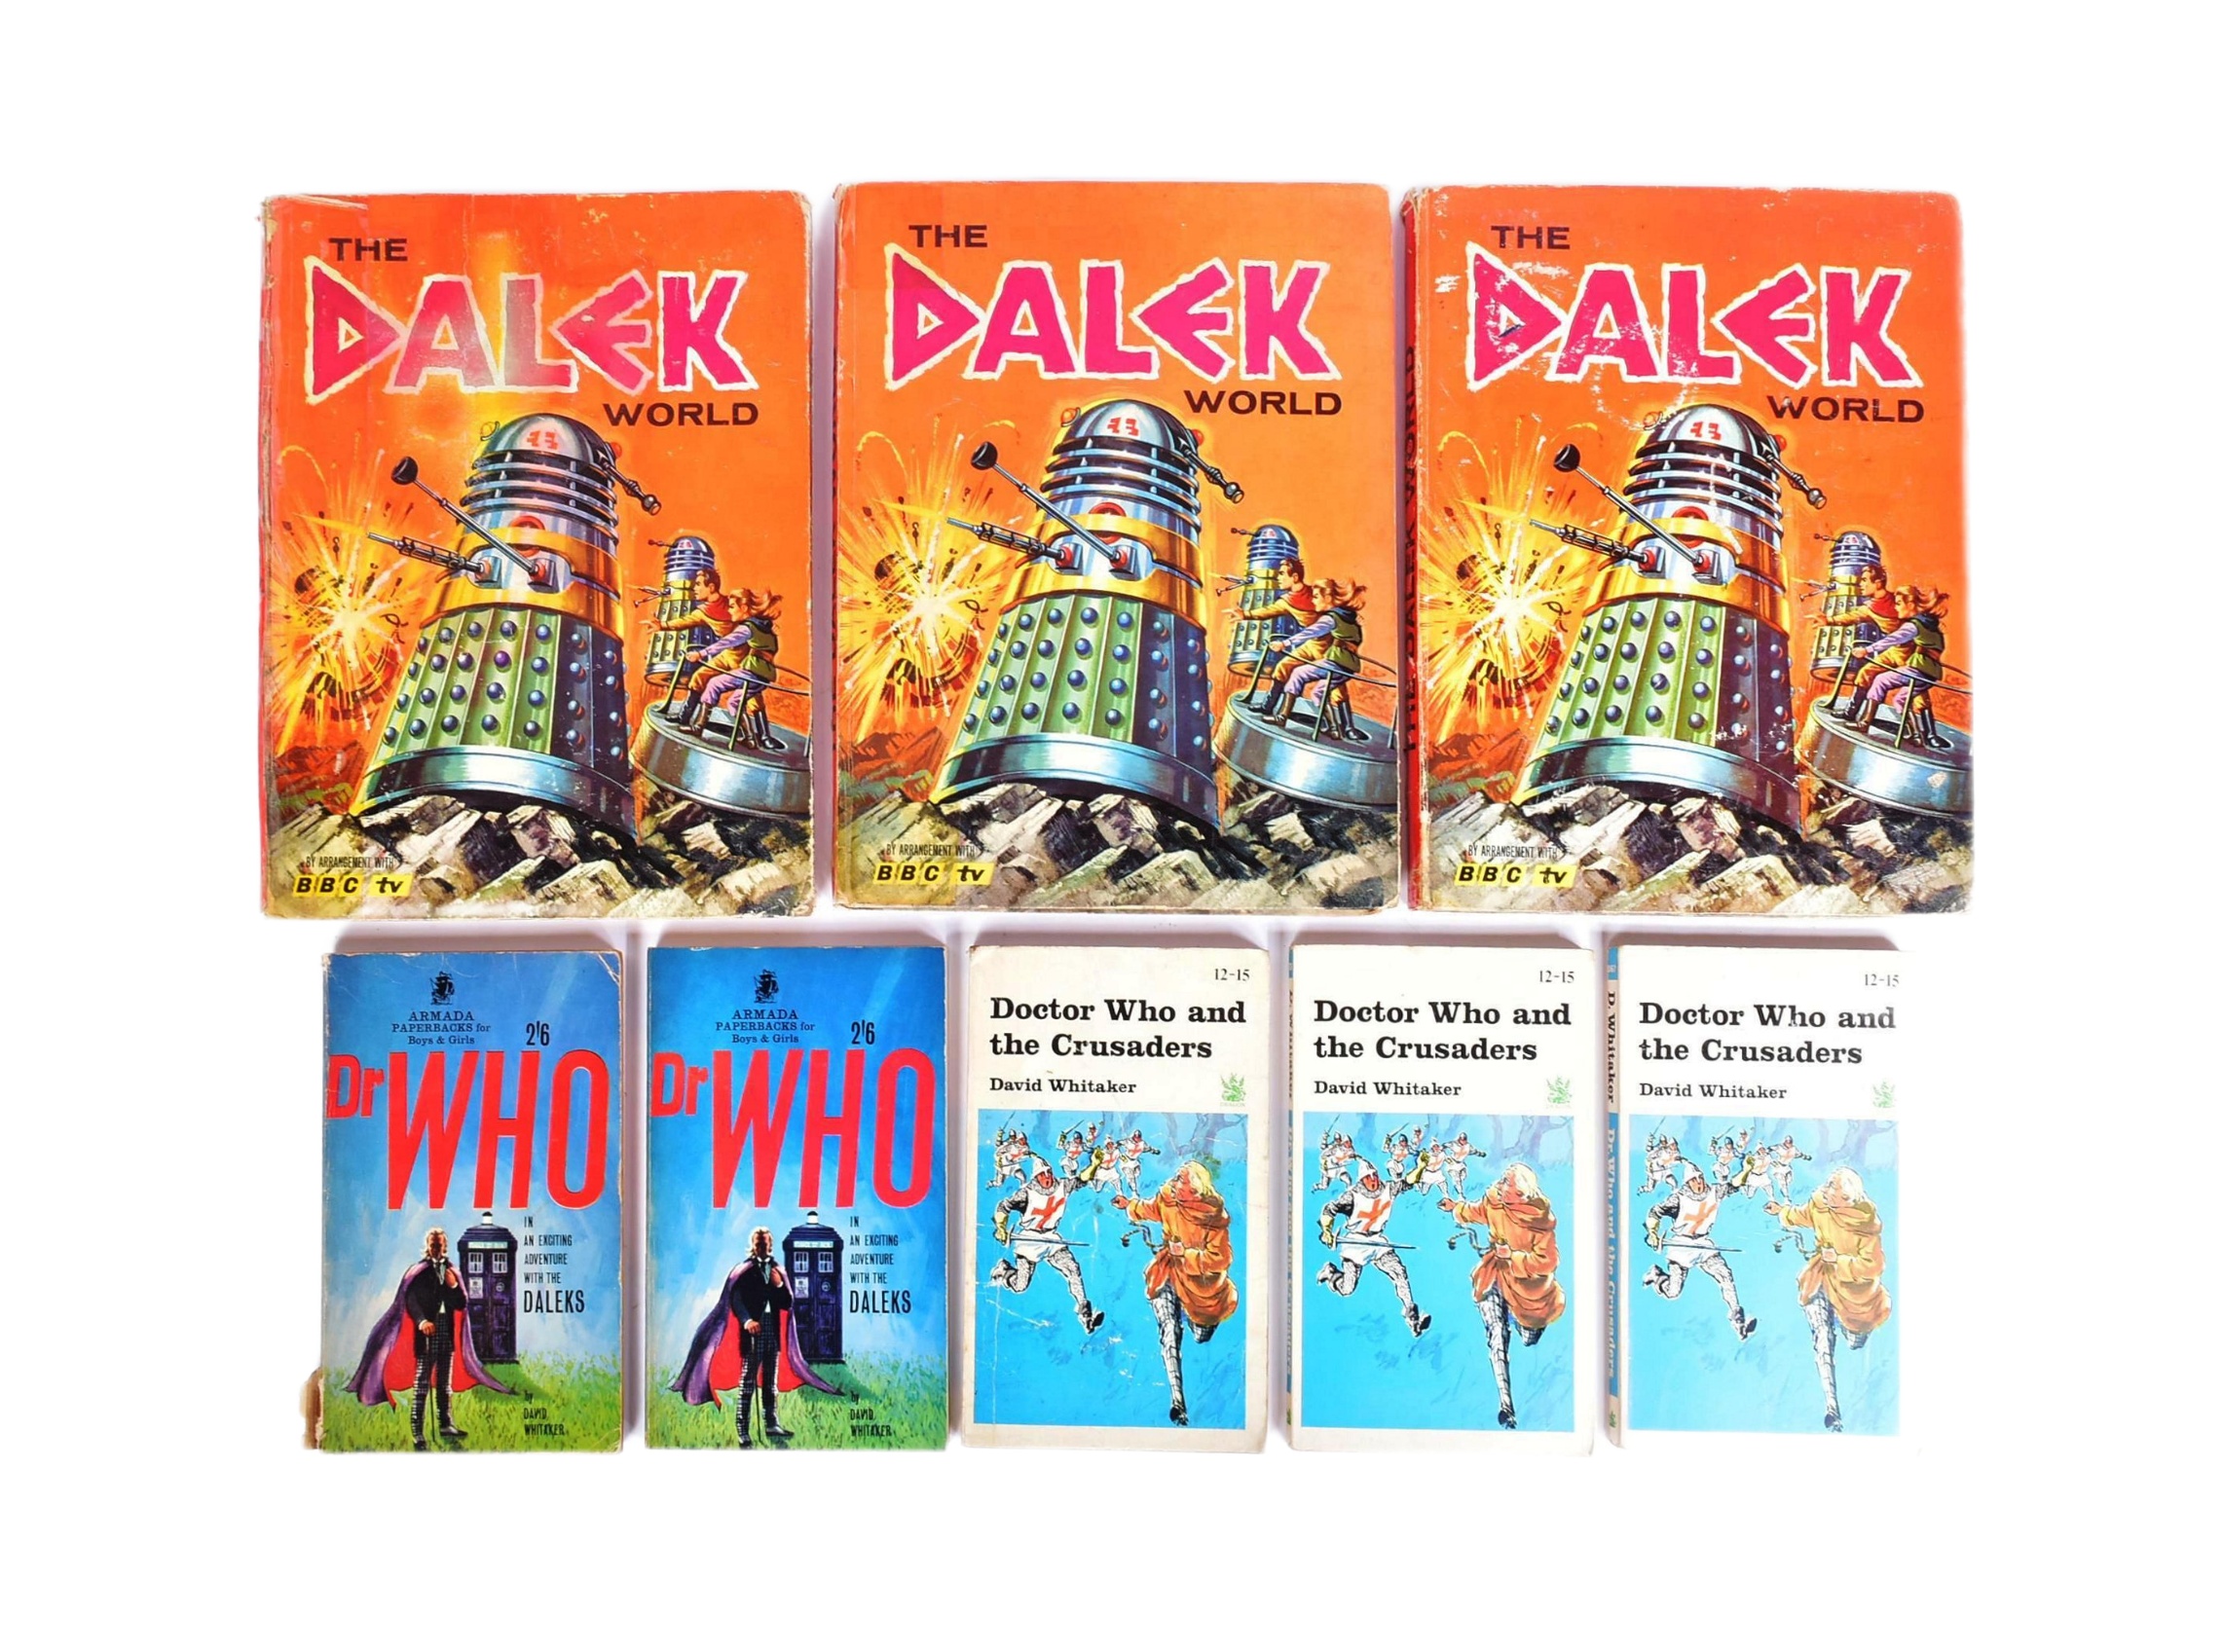 DOCTOR WHO - EARLY 1960S PUBLICATIONS - DALEK WORLD ETC